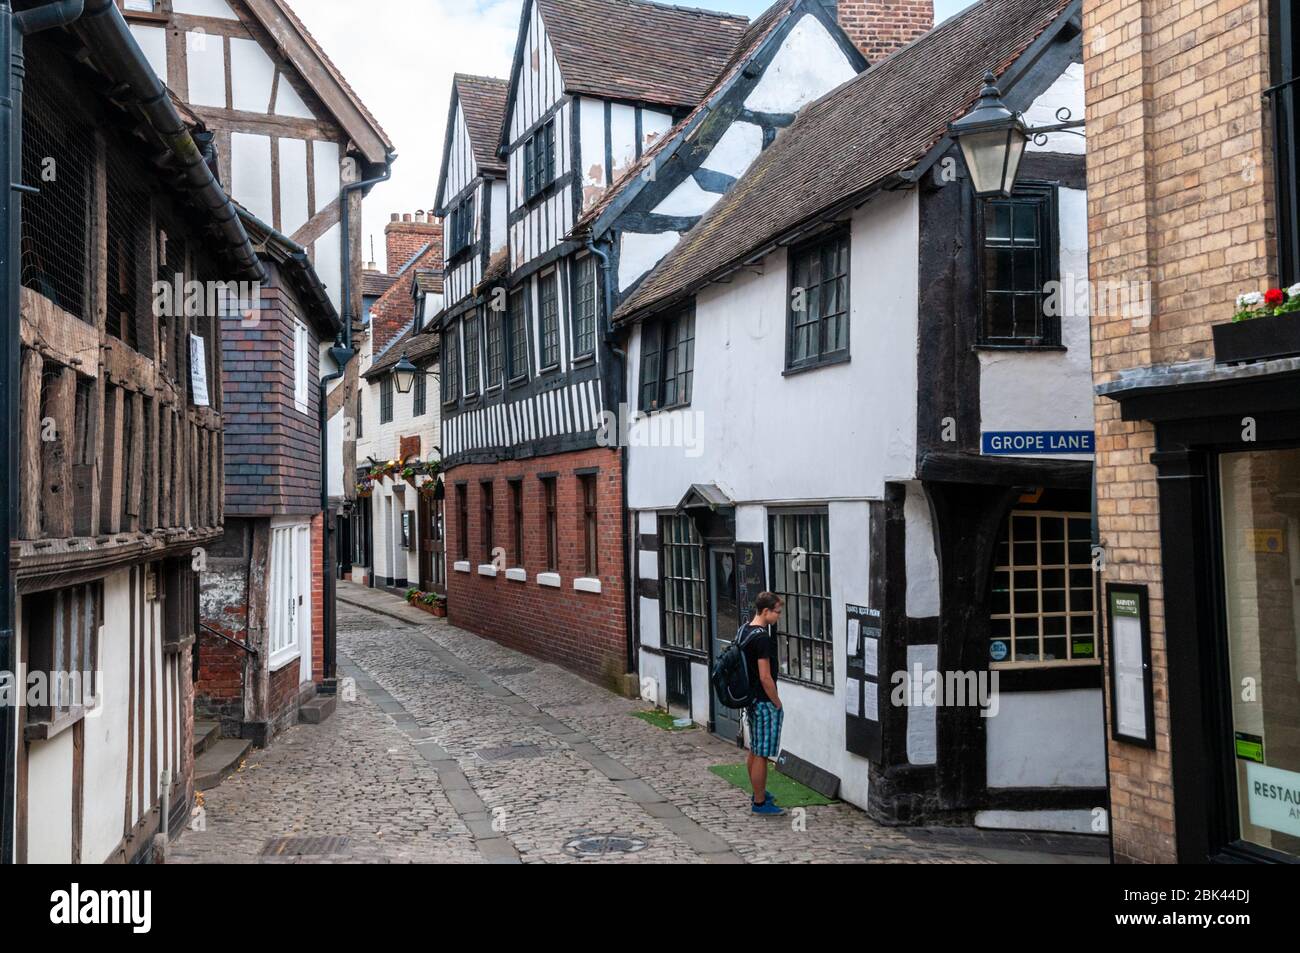 A young man studies the menu of Isaac's Keep restaurant on the corner of Fish Street and Grope Lane in old, historic town centre of Shrewsbury, UK. Stock Photo